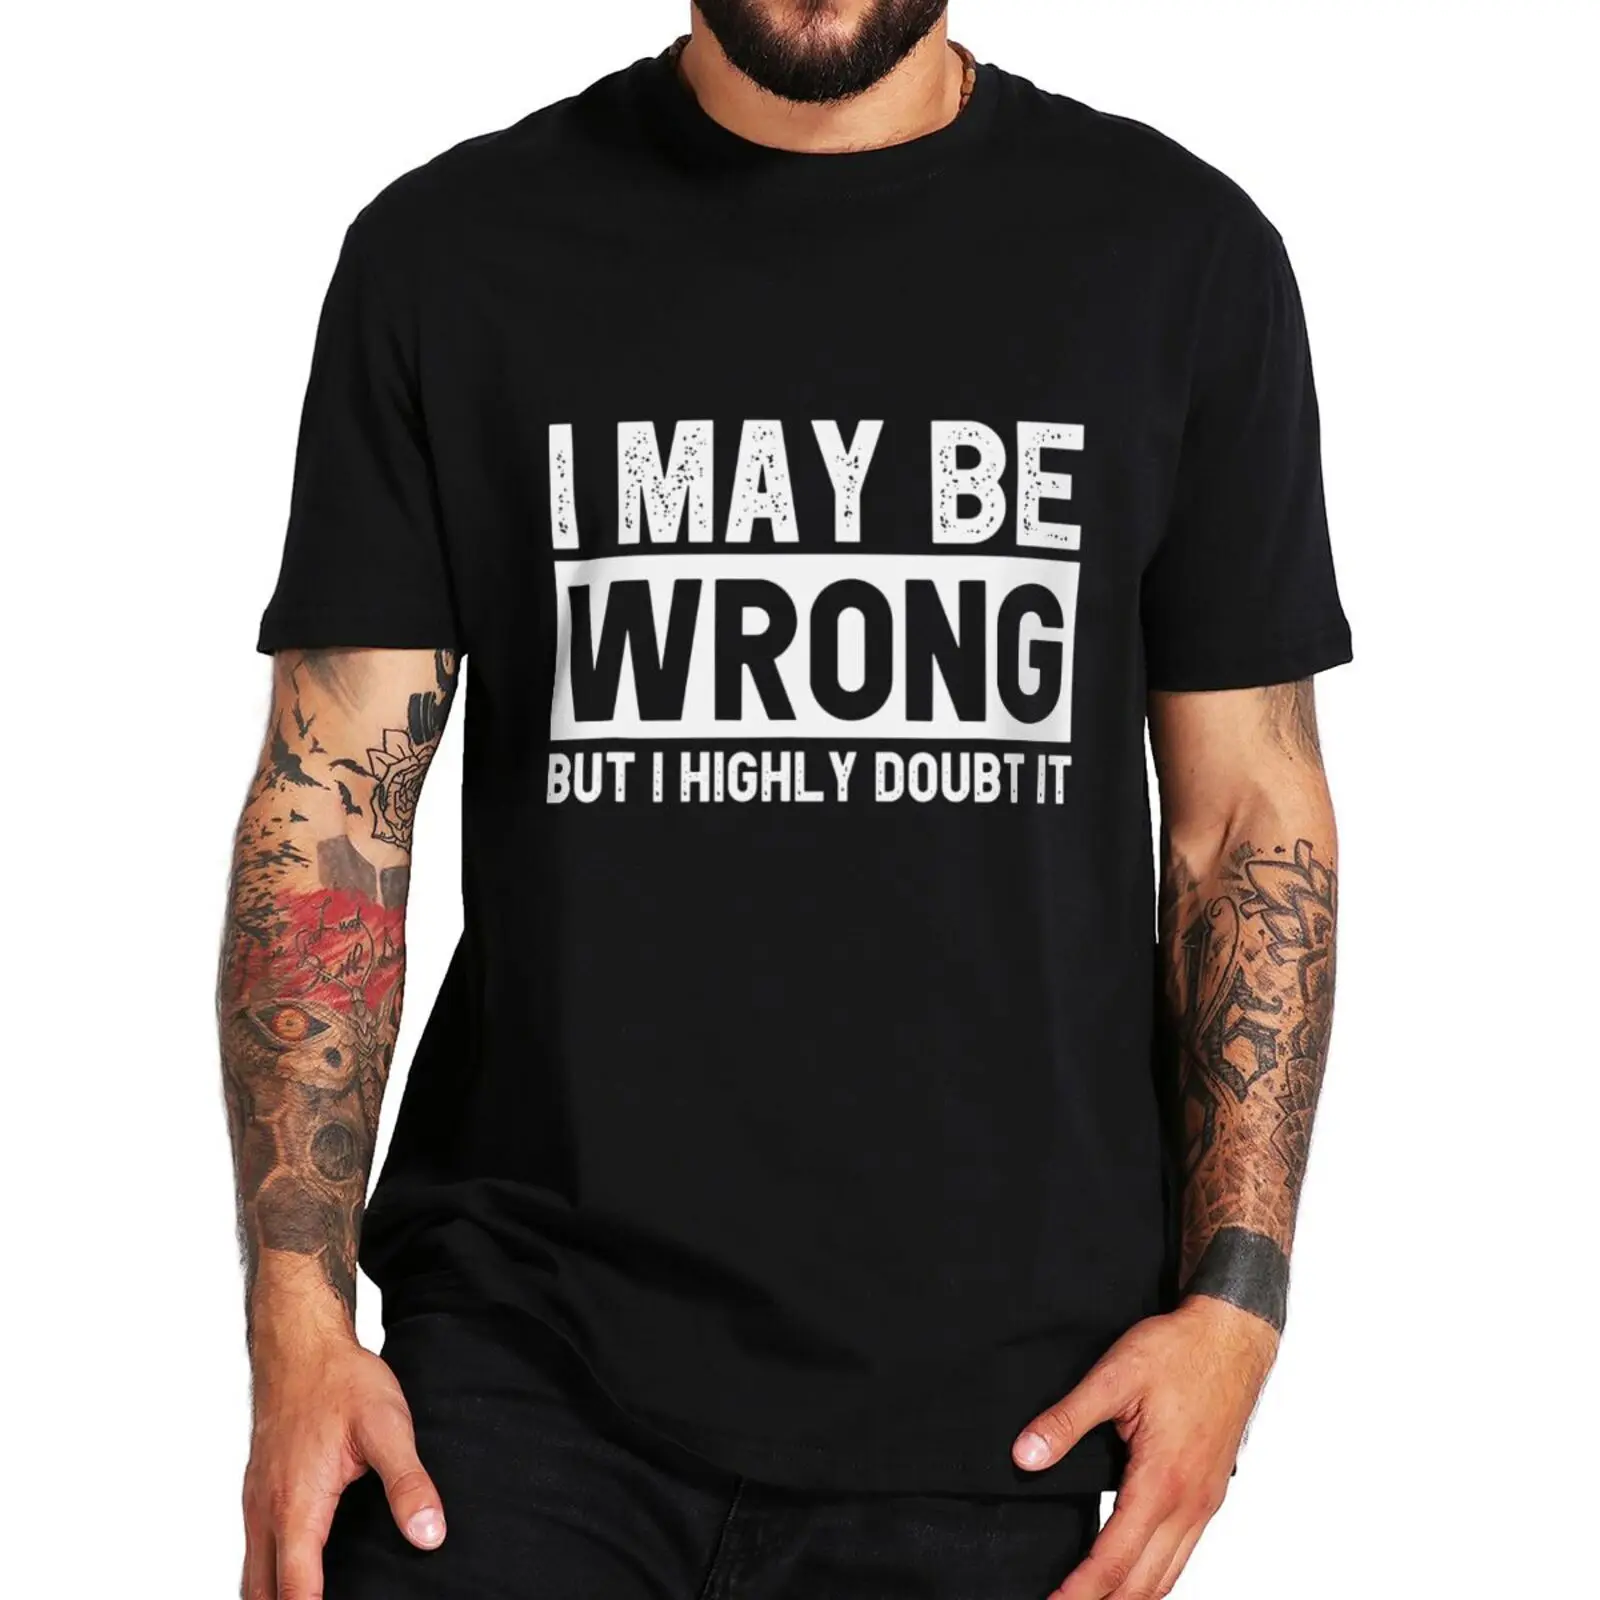 

I May Be Wrong But I Highly Doubt It T Shirt Funny Sarcastic Quote Humor Short Sleeve 100% Cotton Round Neck Casual T-shirts